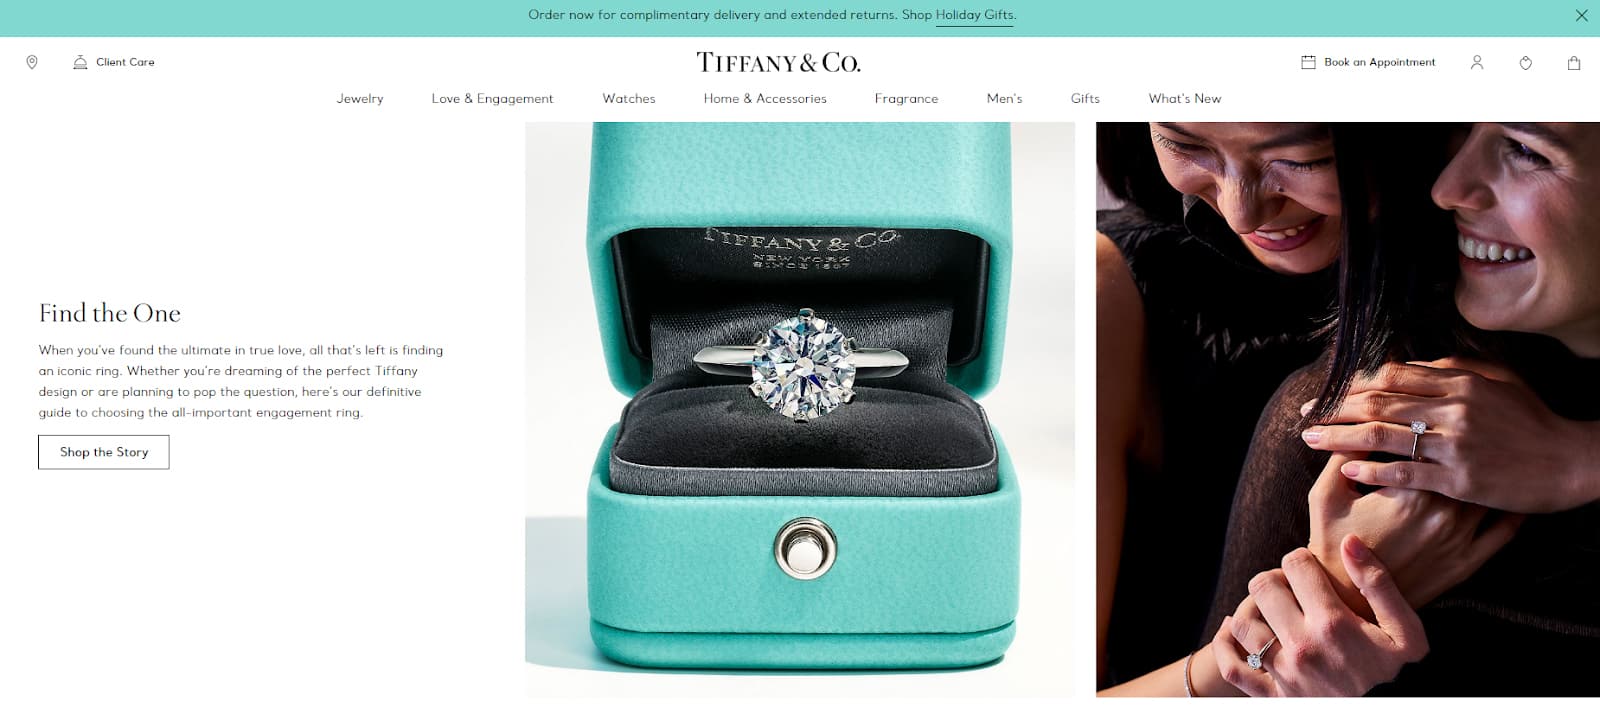 Image of Tiffany & Co. home page with jewelry image.